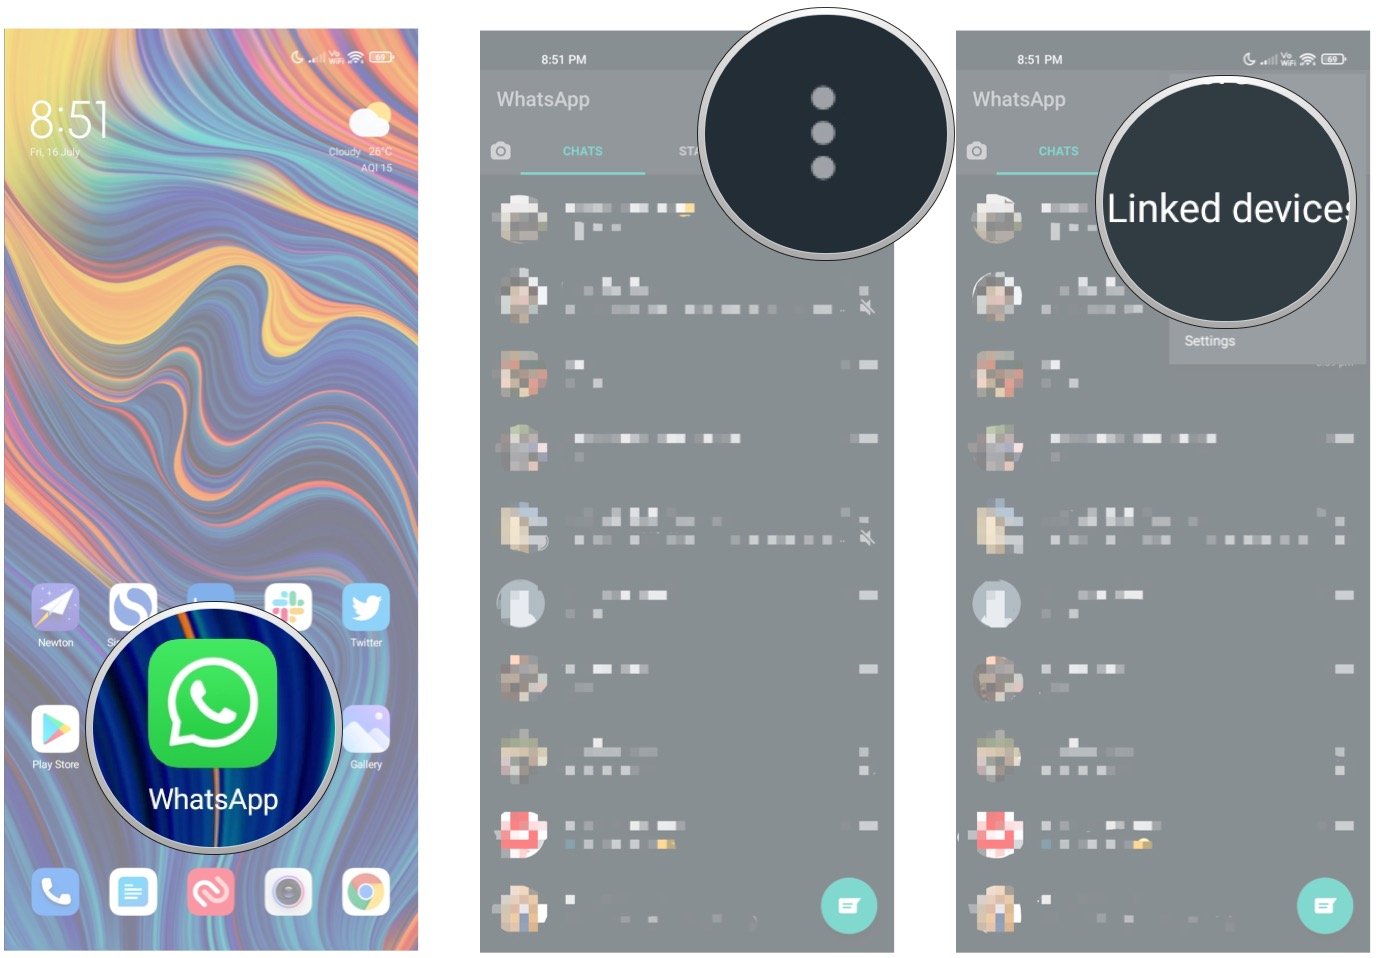 How to sign up for WhatsApp multi-device